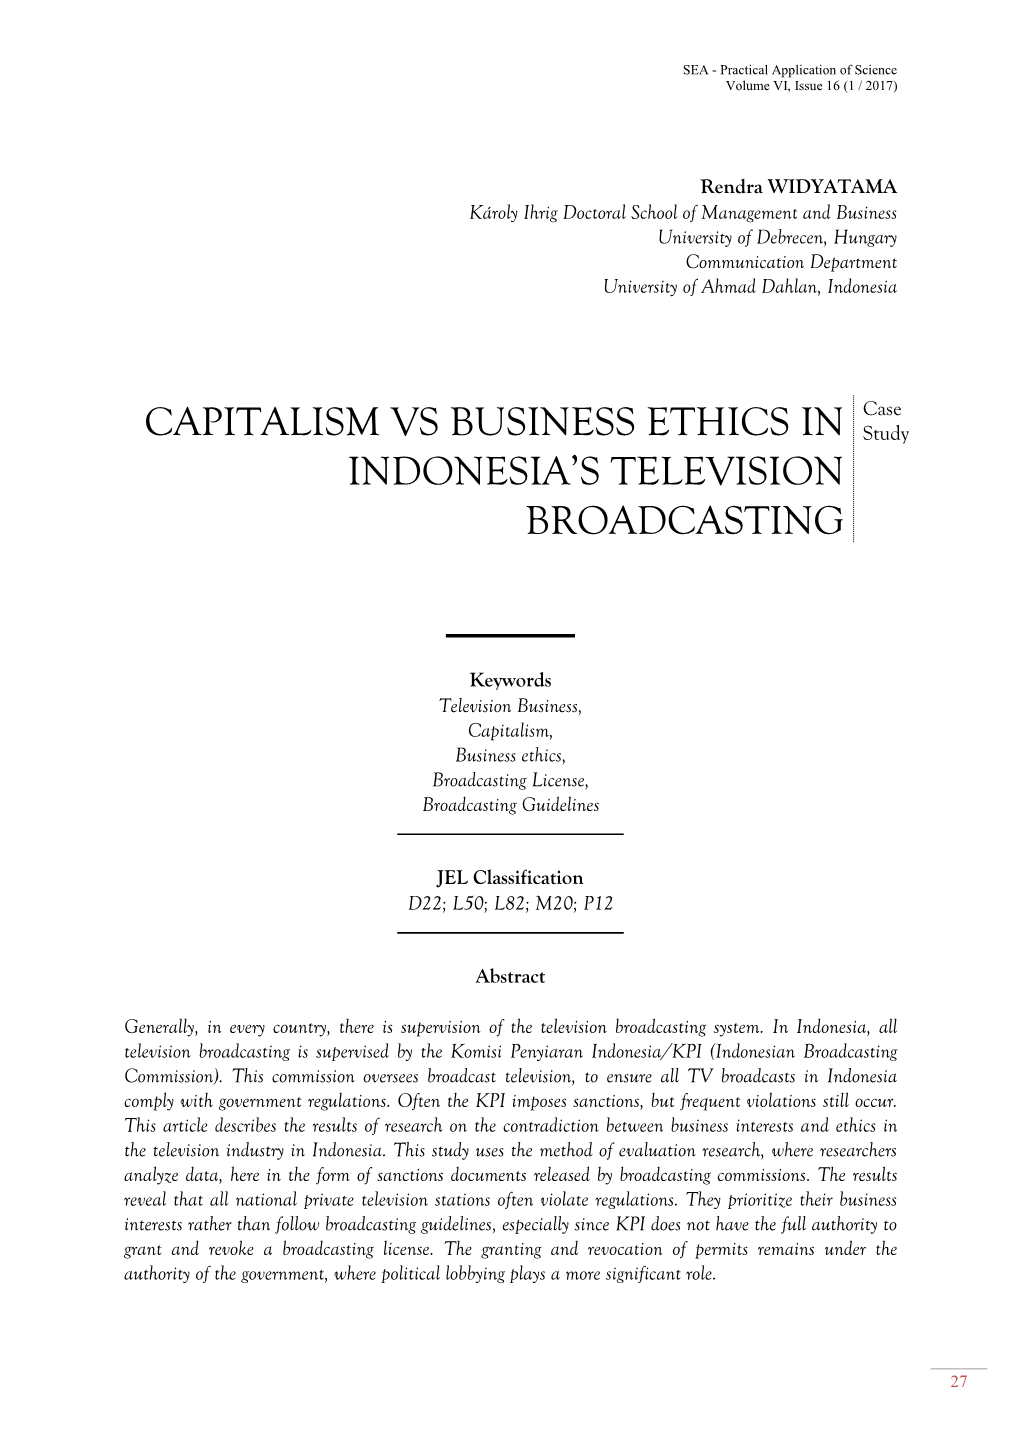 Capitalism Vs Business Ethics in Indonesia's Television